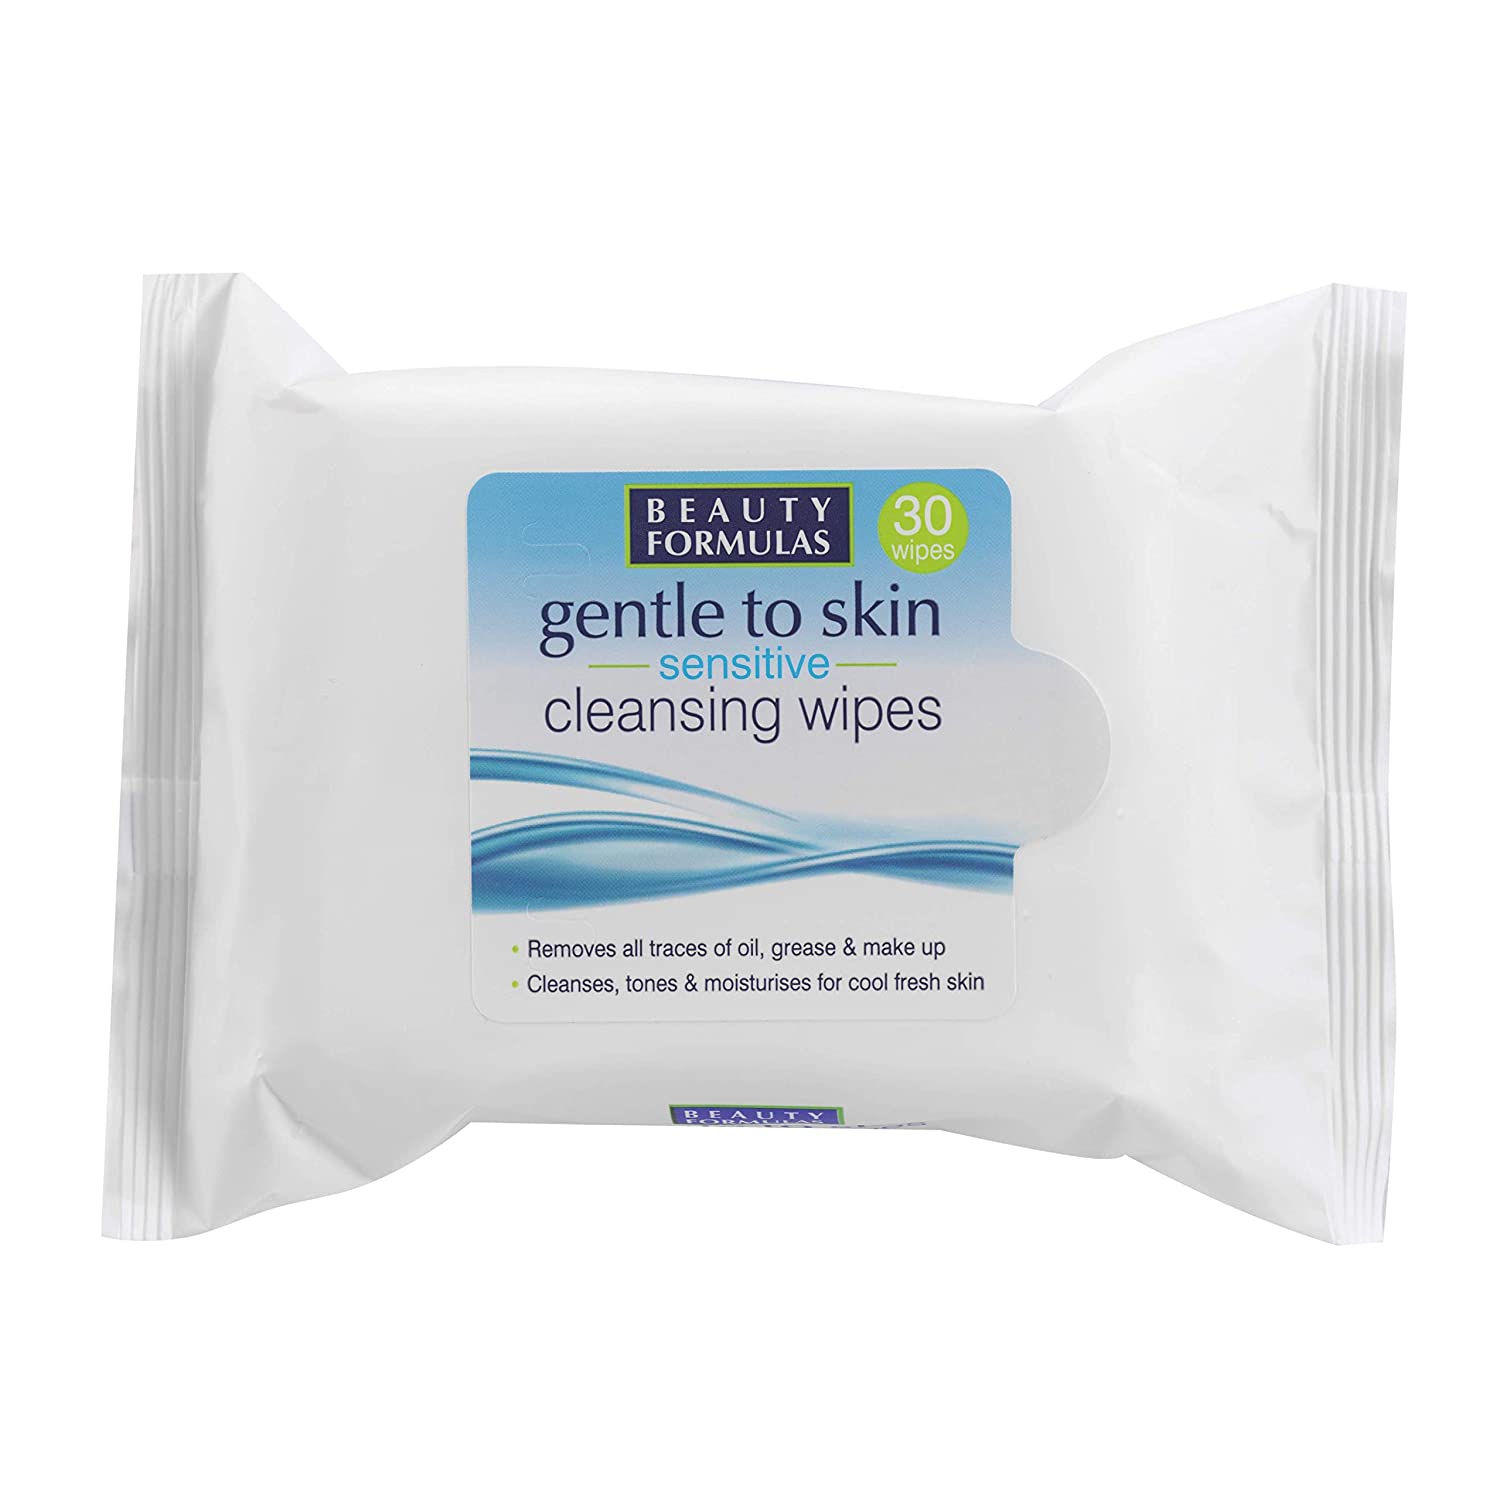 Beauty Formulas Gentle to Skin Sensitive Cleansing Wipes (30 Wipes)